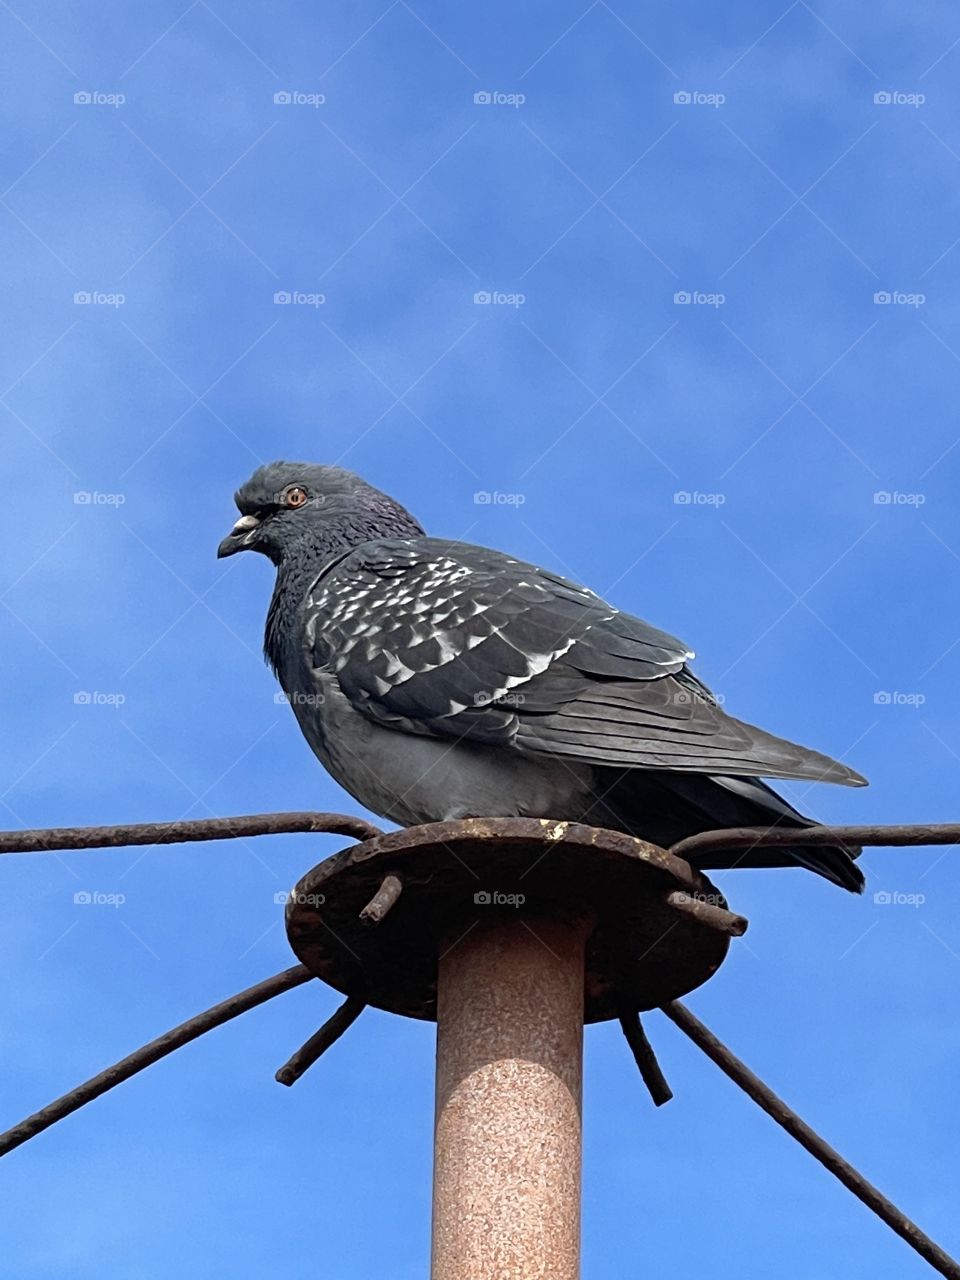 Feral grey pigeon makes itself comfortable atop metal laundry clothes line pole in backyard, closeup against blue sky, room for text copy South Australia nuisance and environmental threat to wildlife 